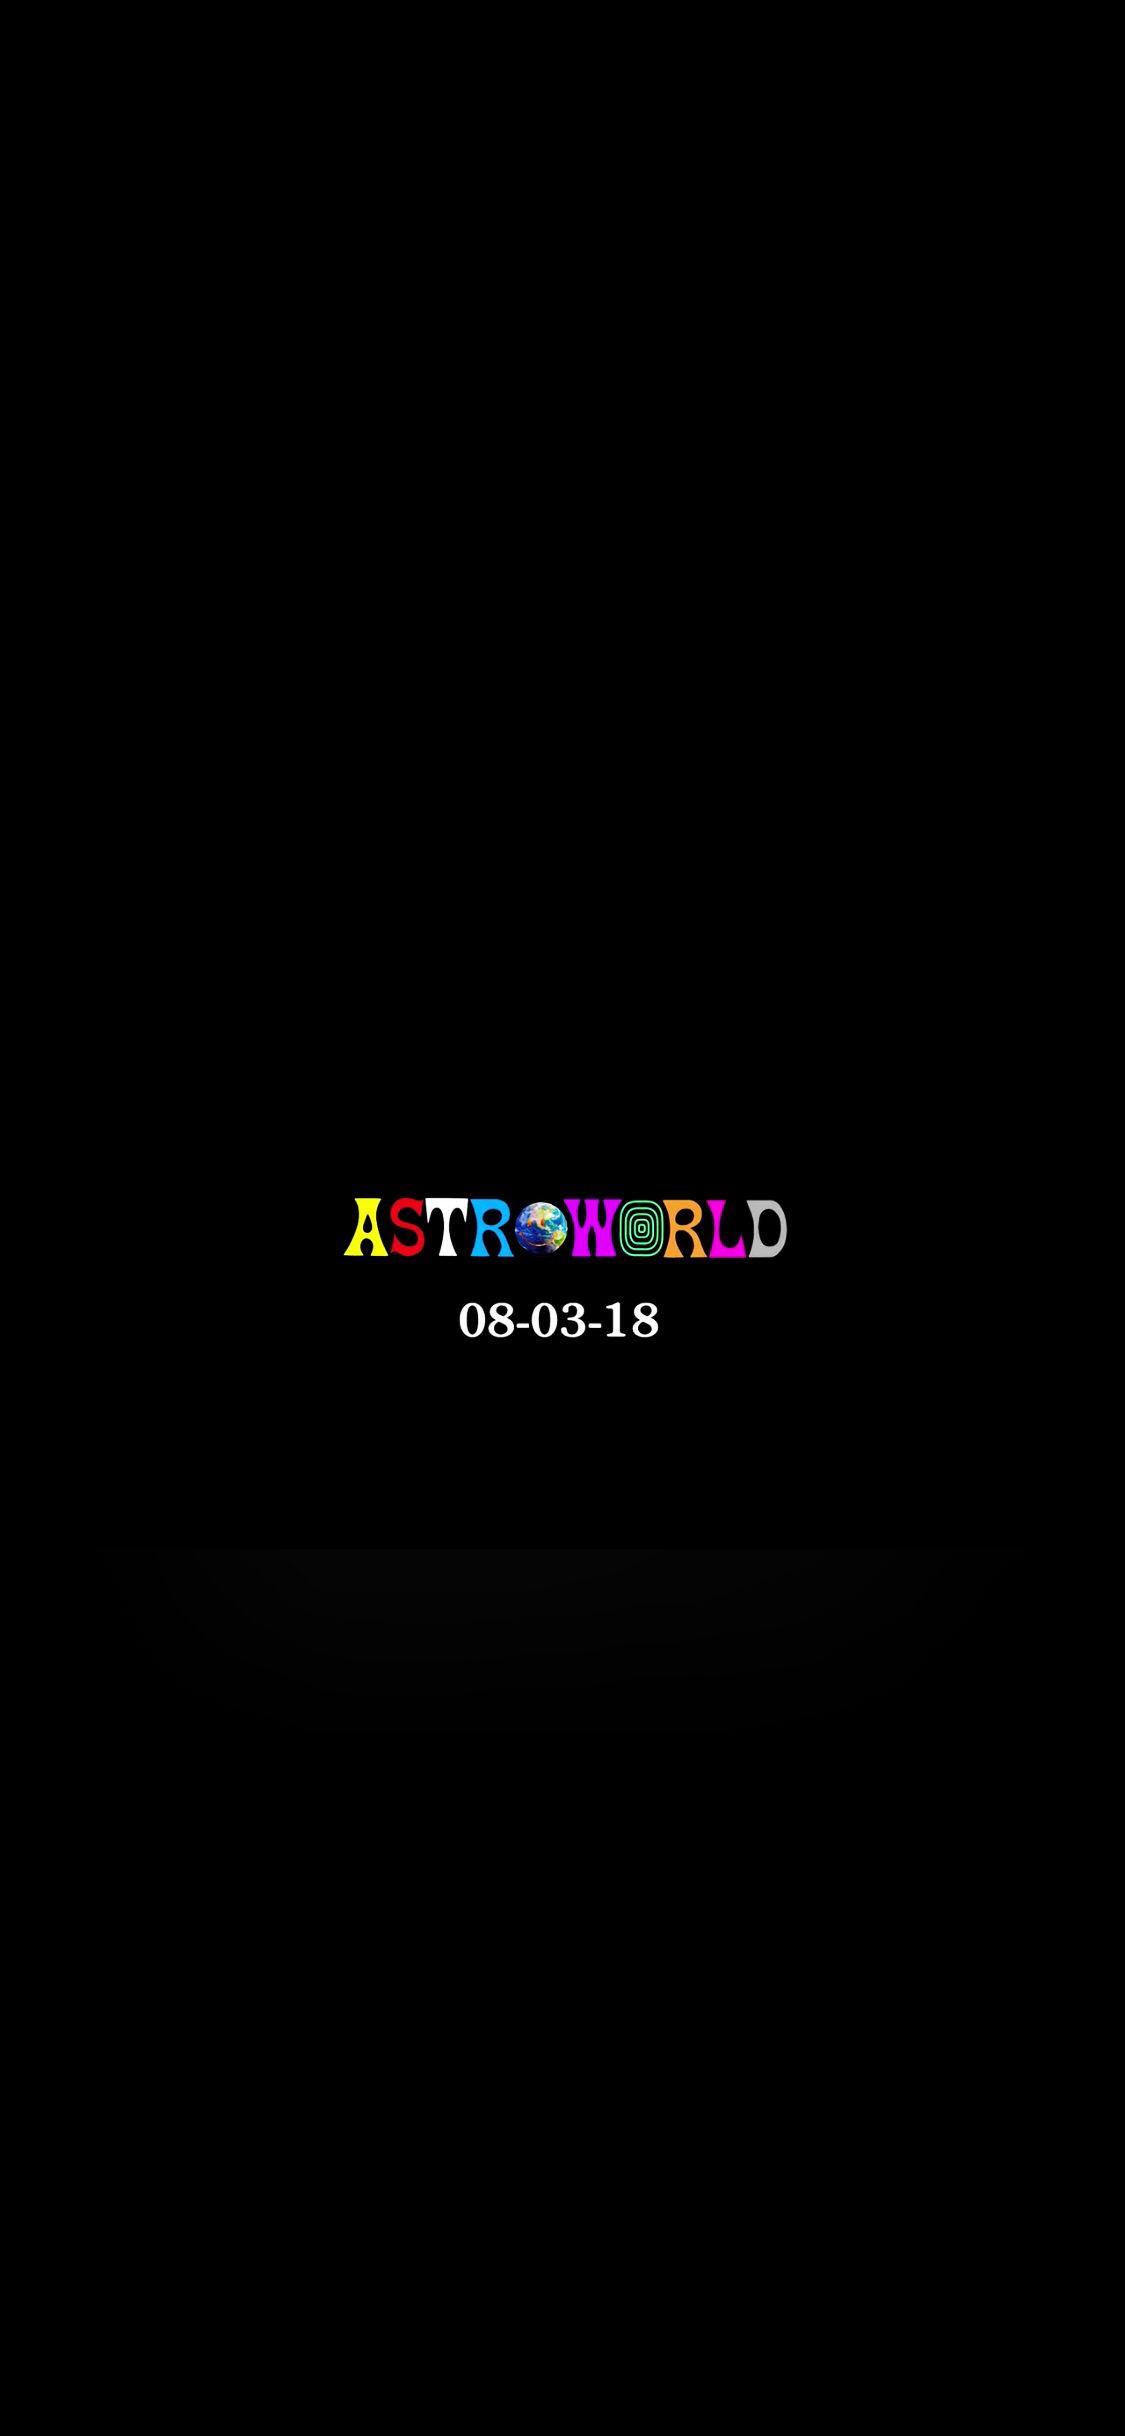 Astroworld Wallpaper from Apple Music trailer (iPhone X)